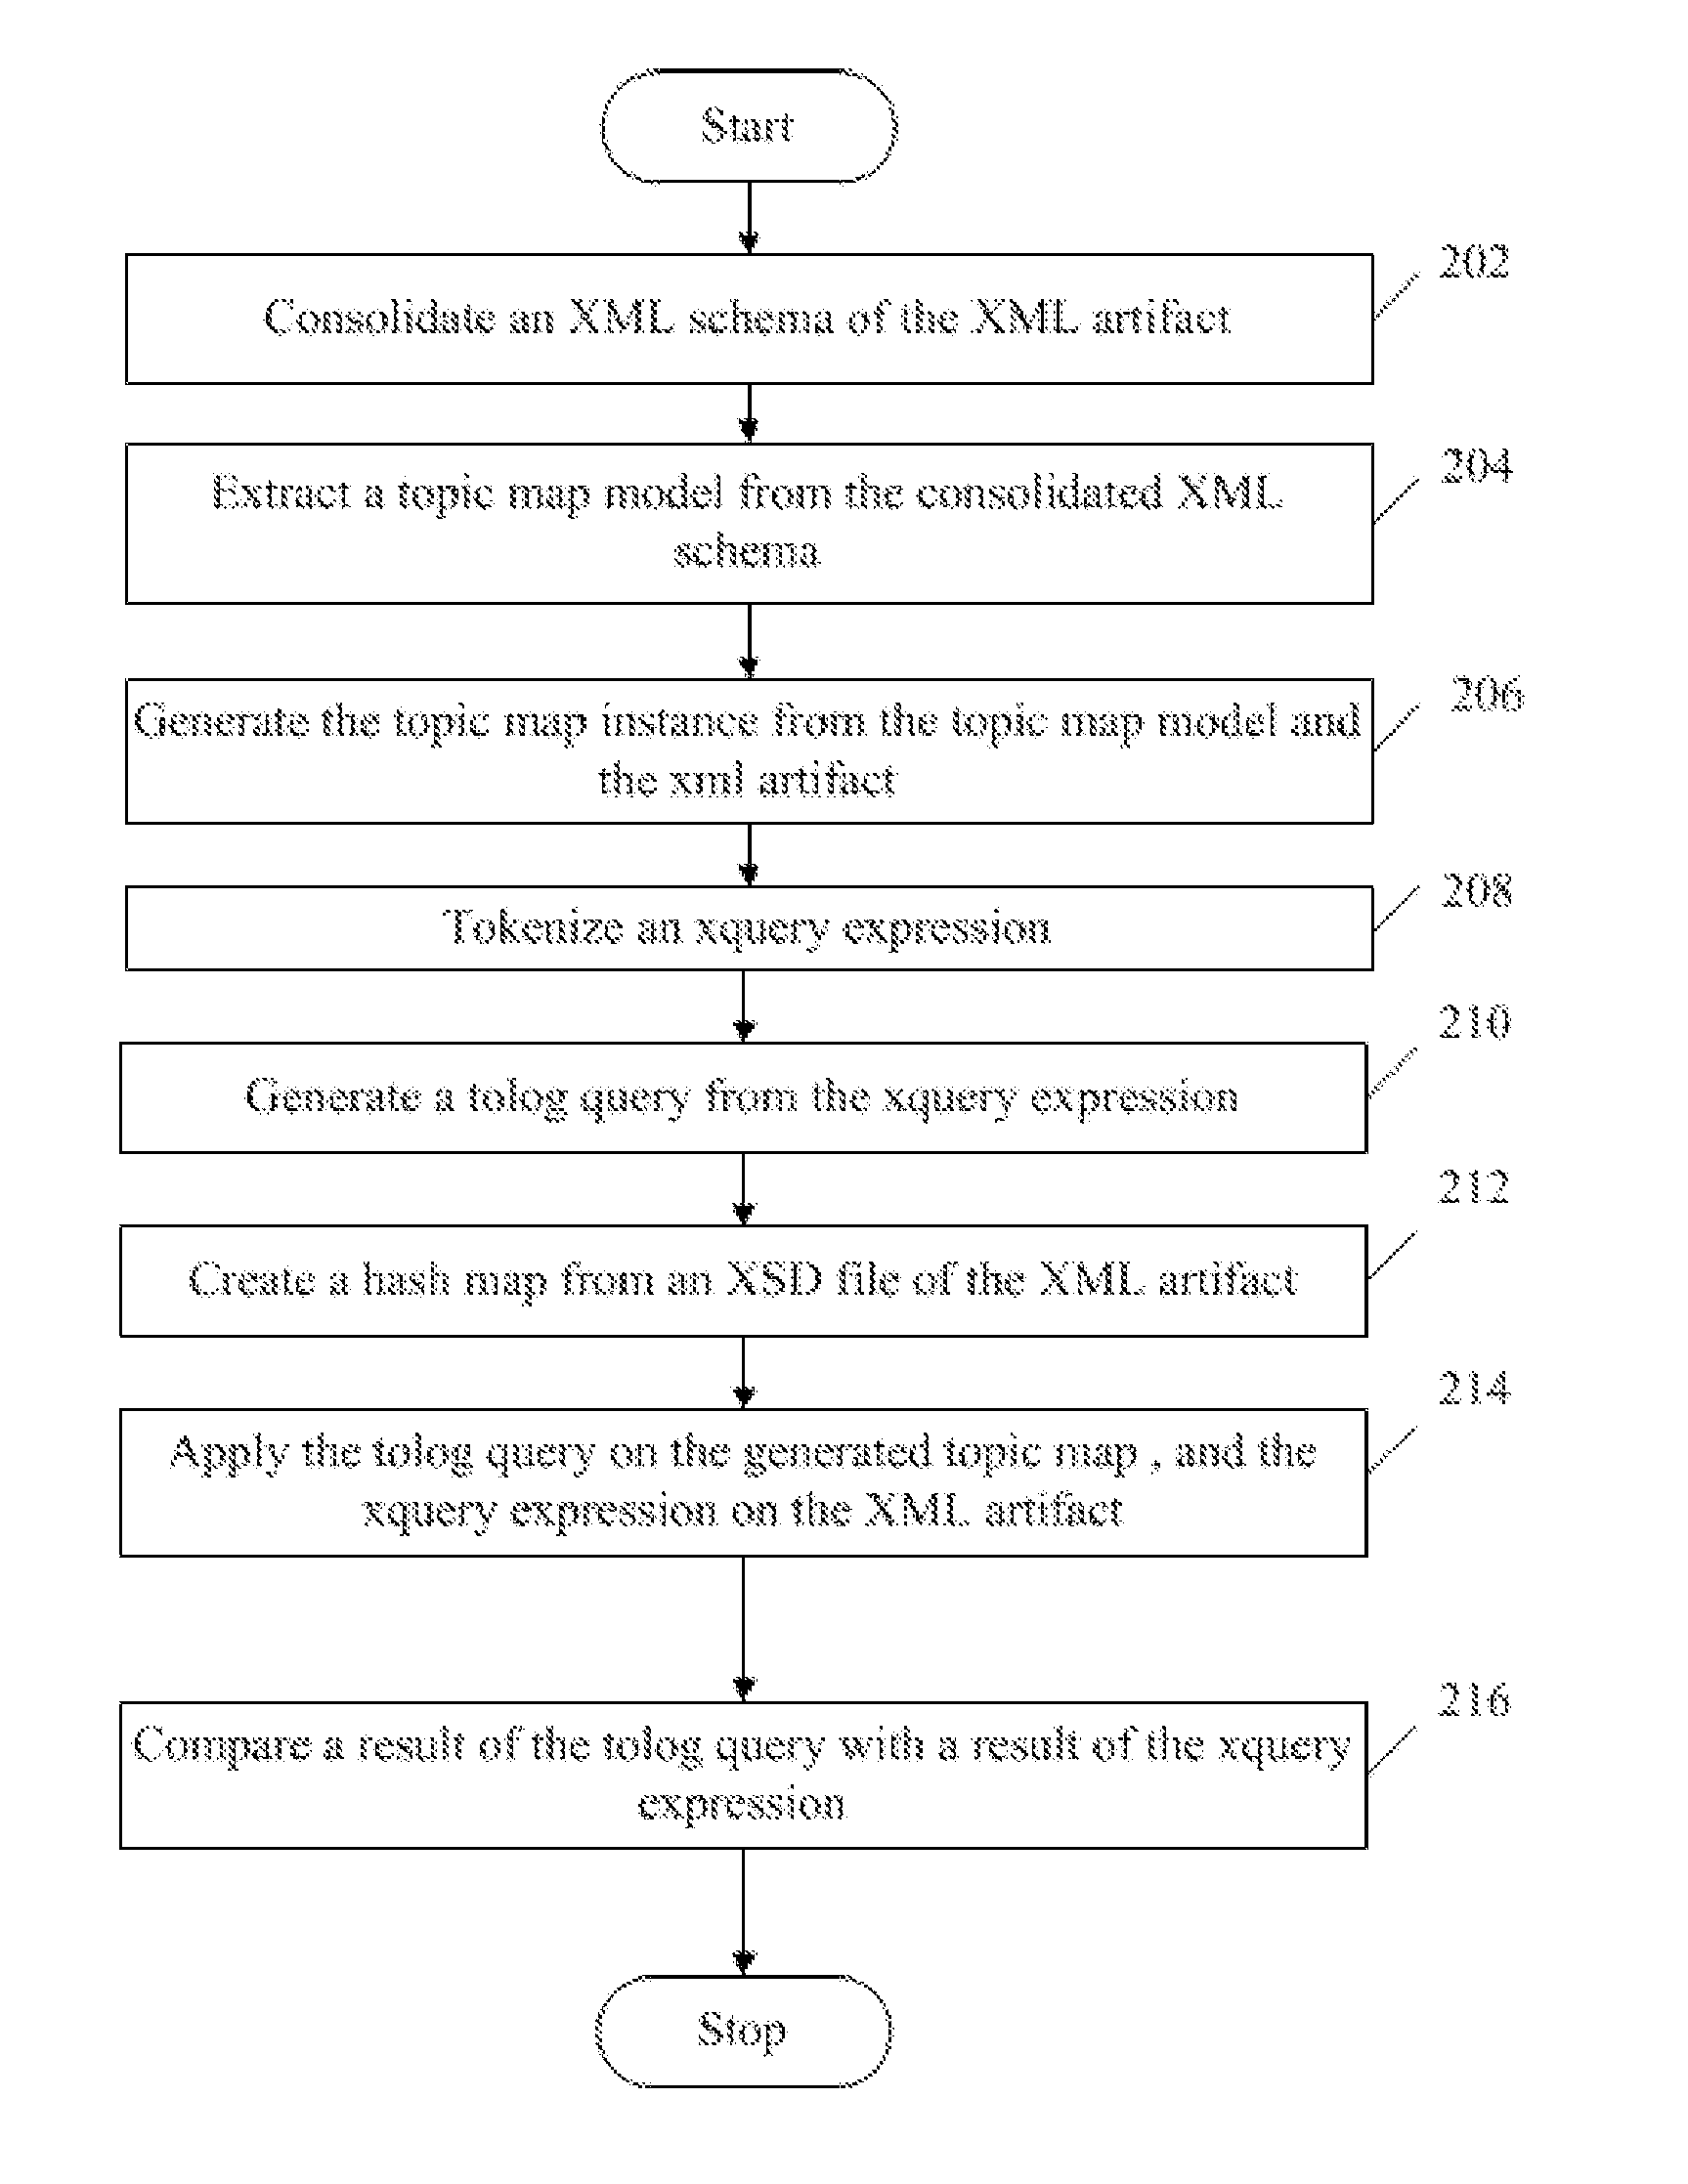 Methods for converting an XML artifact into a topic map instance and devices thereof